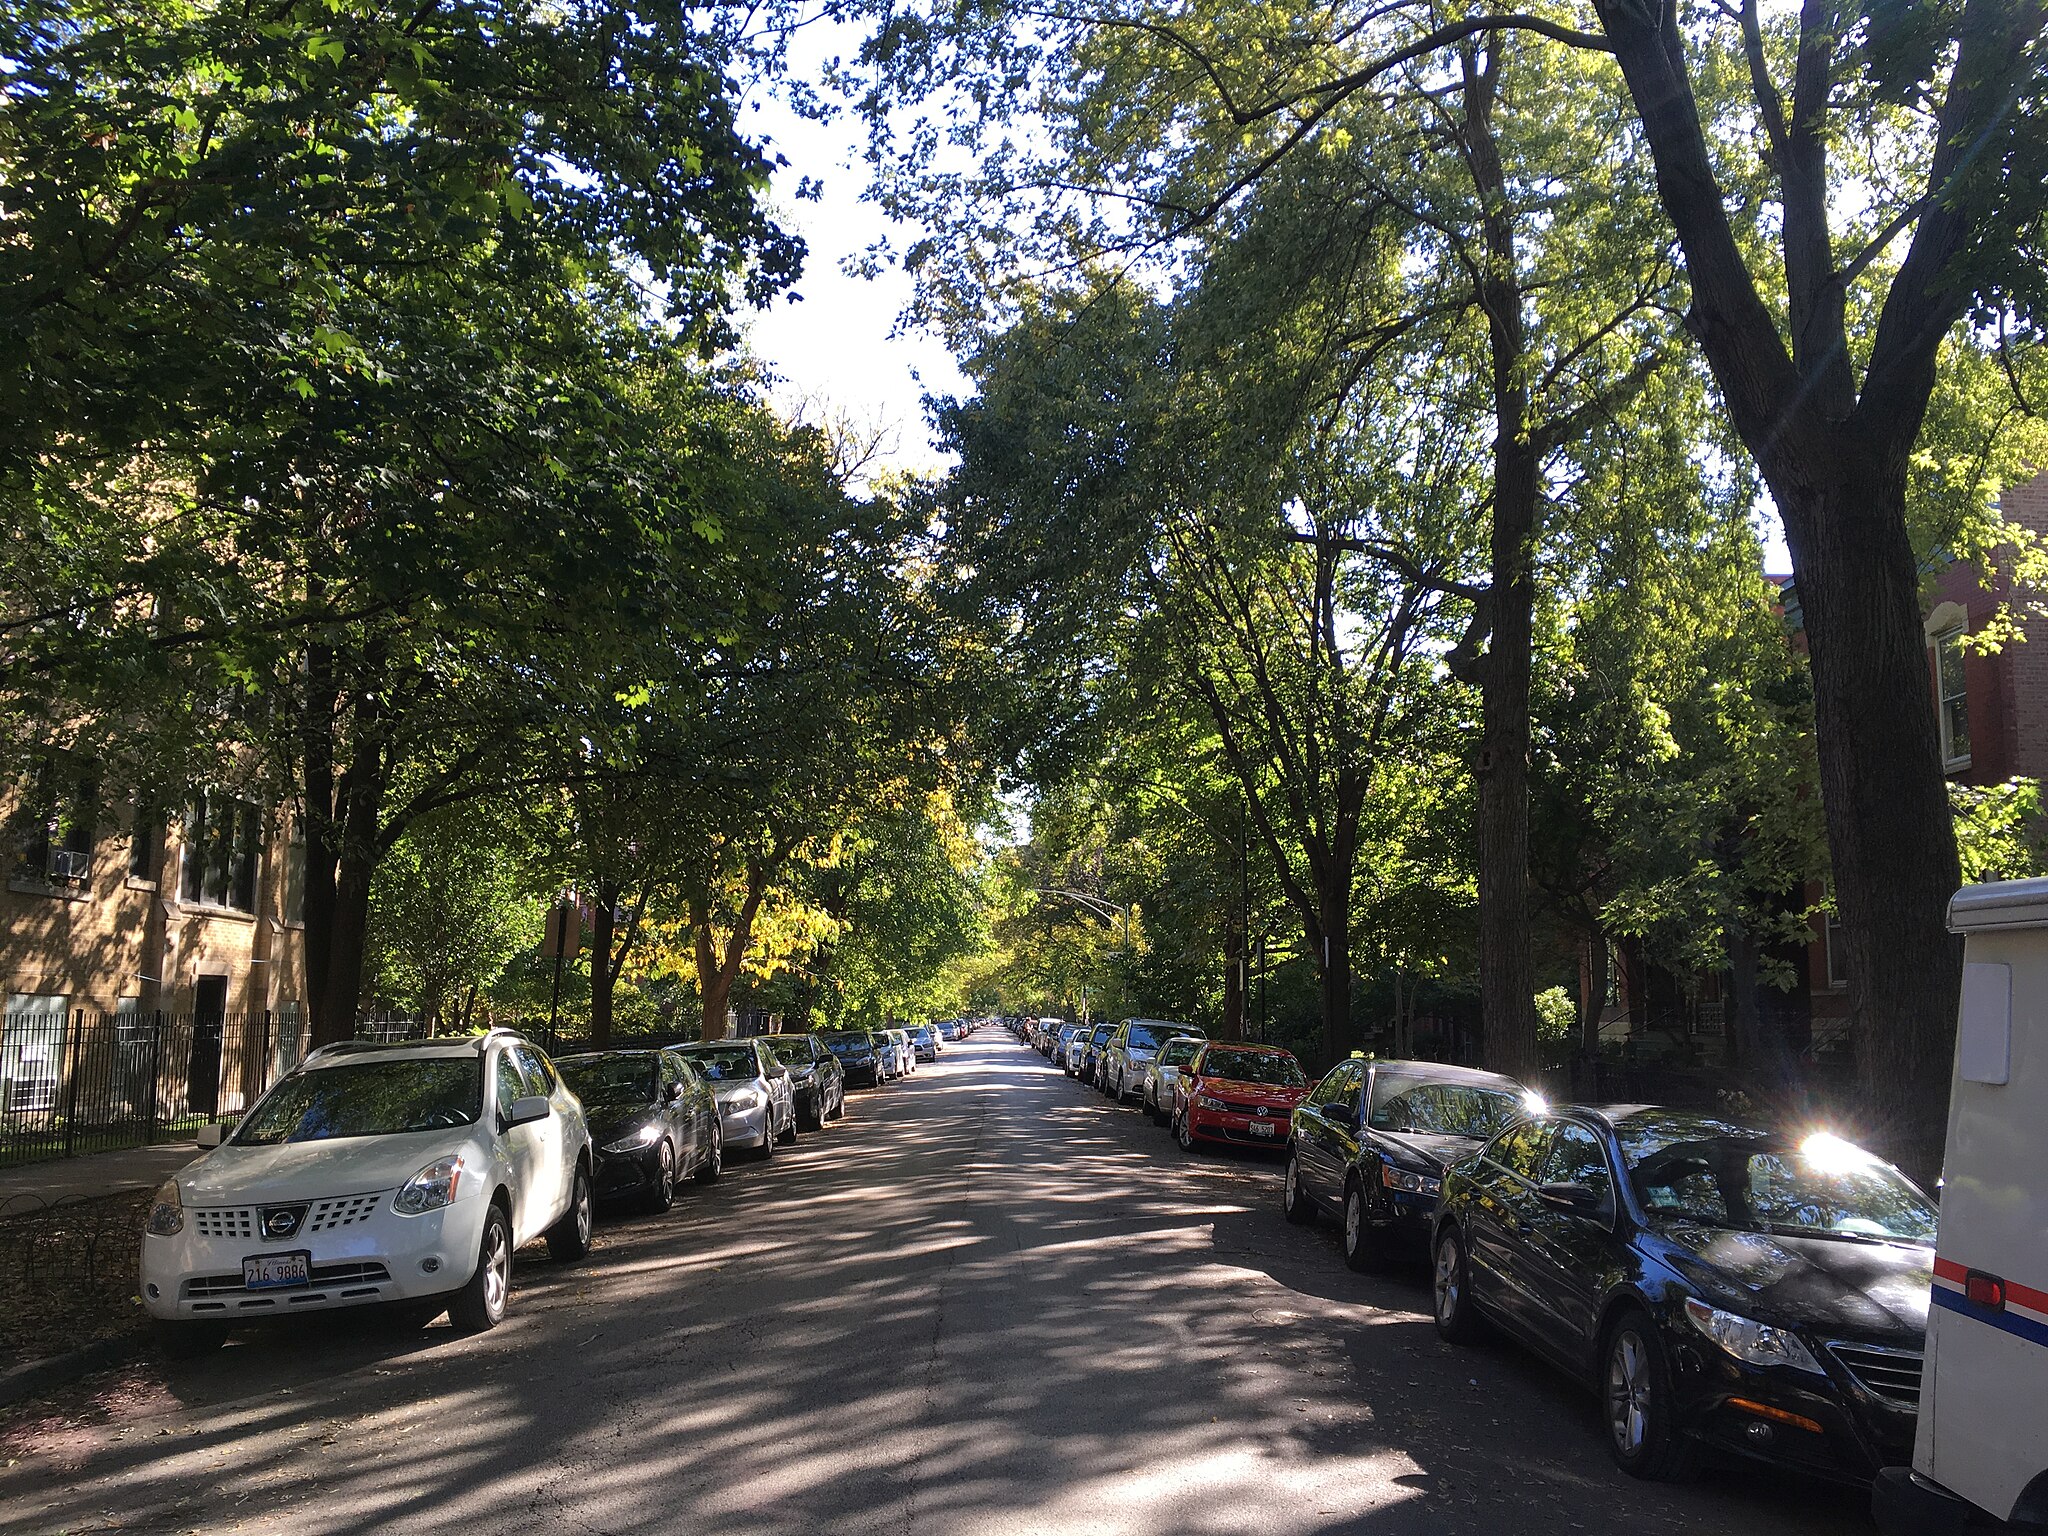 One point perspective shot of a suburban street with a healthy tree canopy cover. Eric Fischer, CC BY 2.0 &lt;https://creativecommons.org/licenses/by/2.0&gt;, via Wikimedia Commons